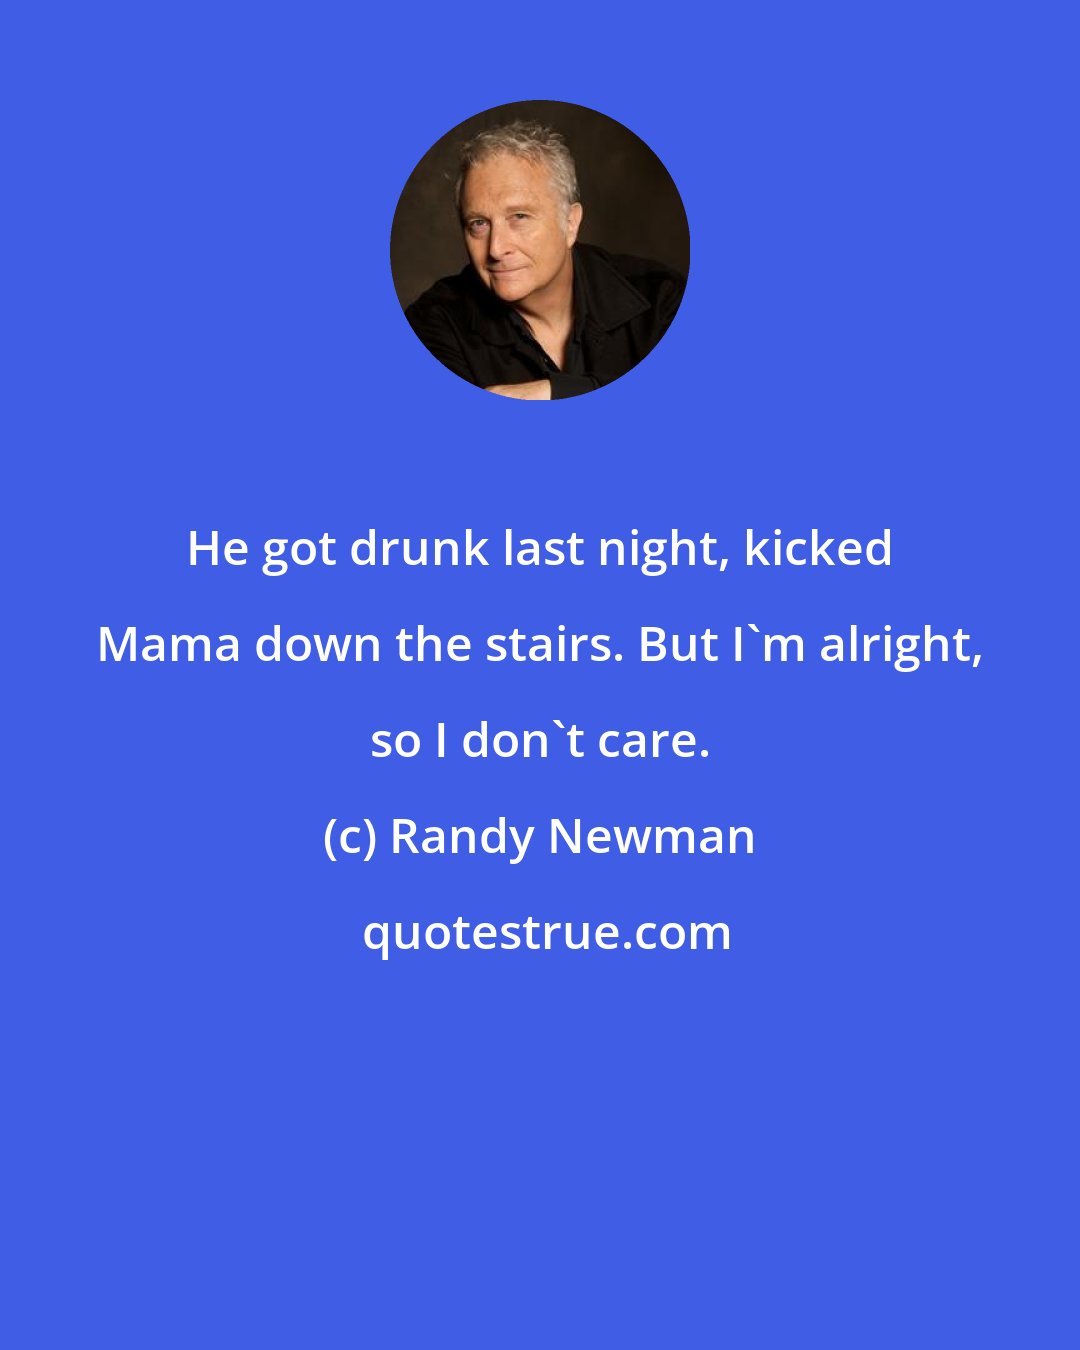 Randy Newman: He got drunk last night, kicked Mama down the stairs. But I'm alright, so I don't care.